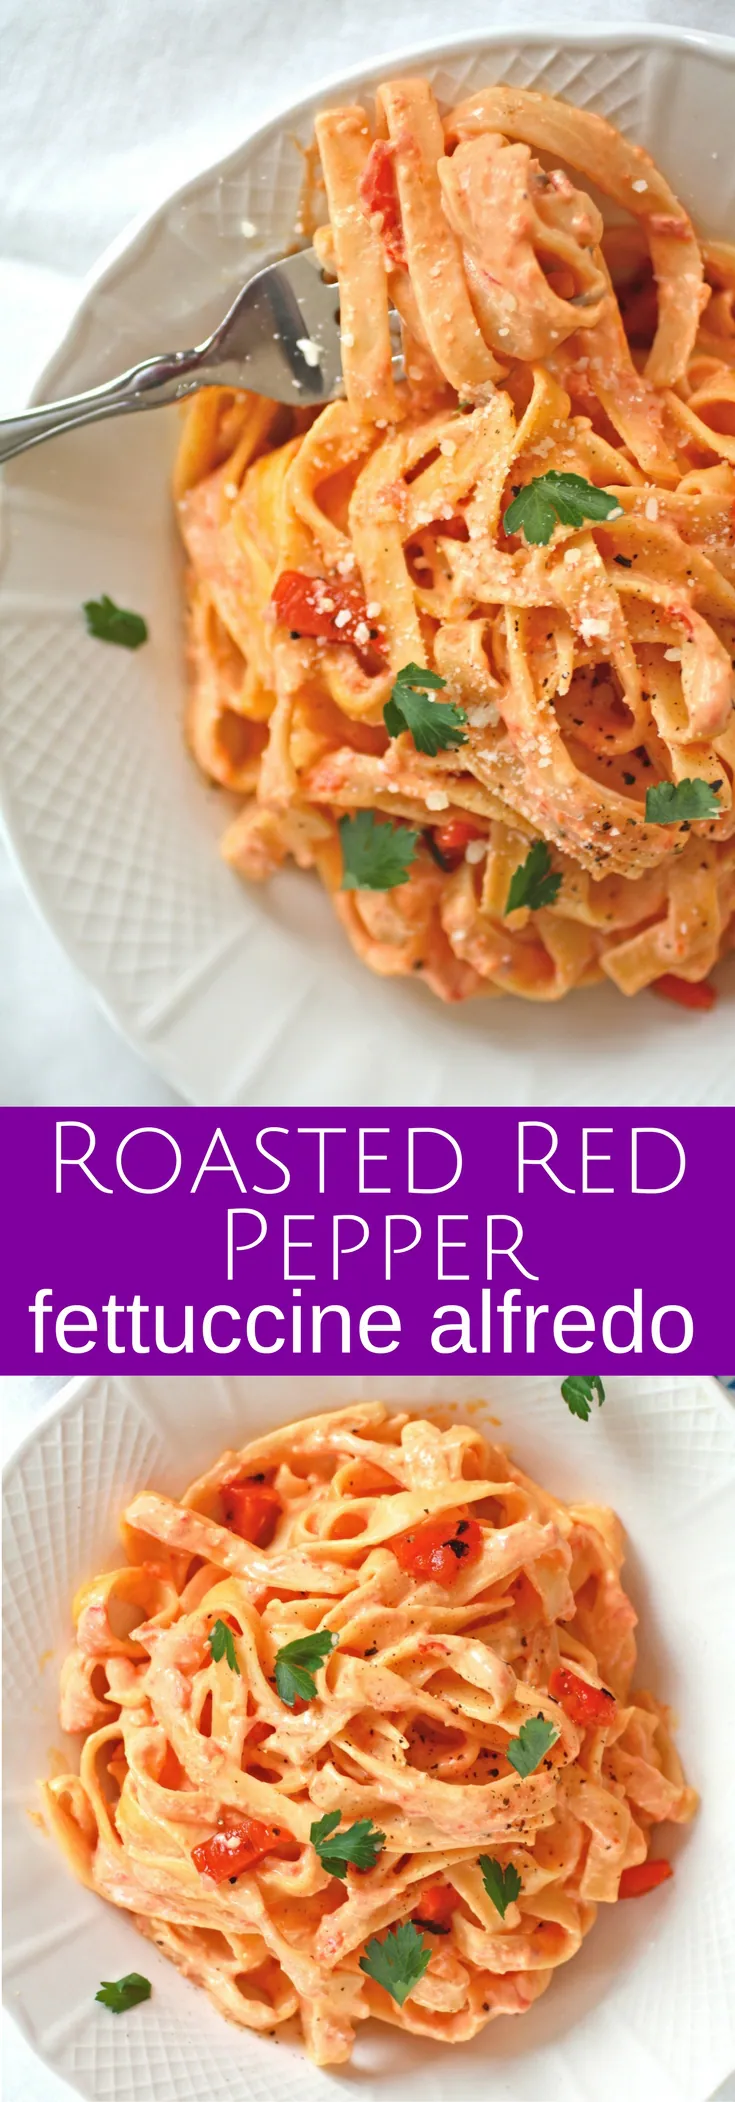 Roasted Red Pepper Fettuccine Alfredo is an easy-to-make and delicious pasta dish everyone will love! It's big on flavor!